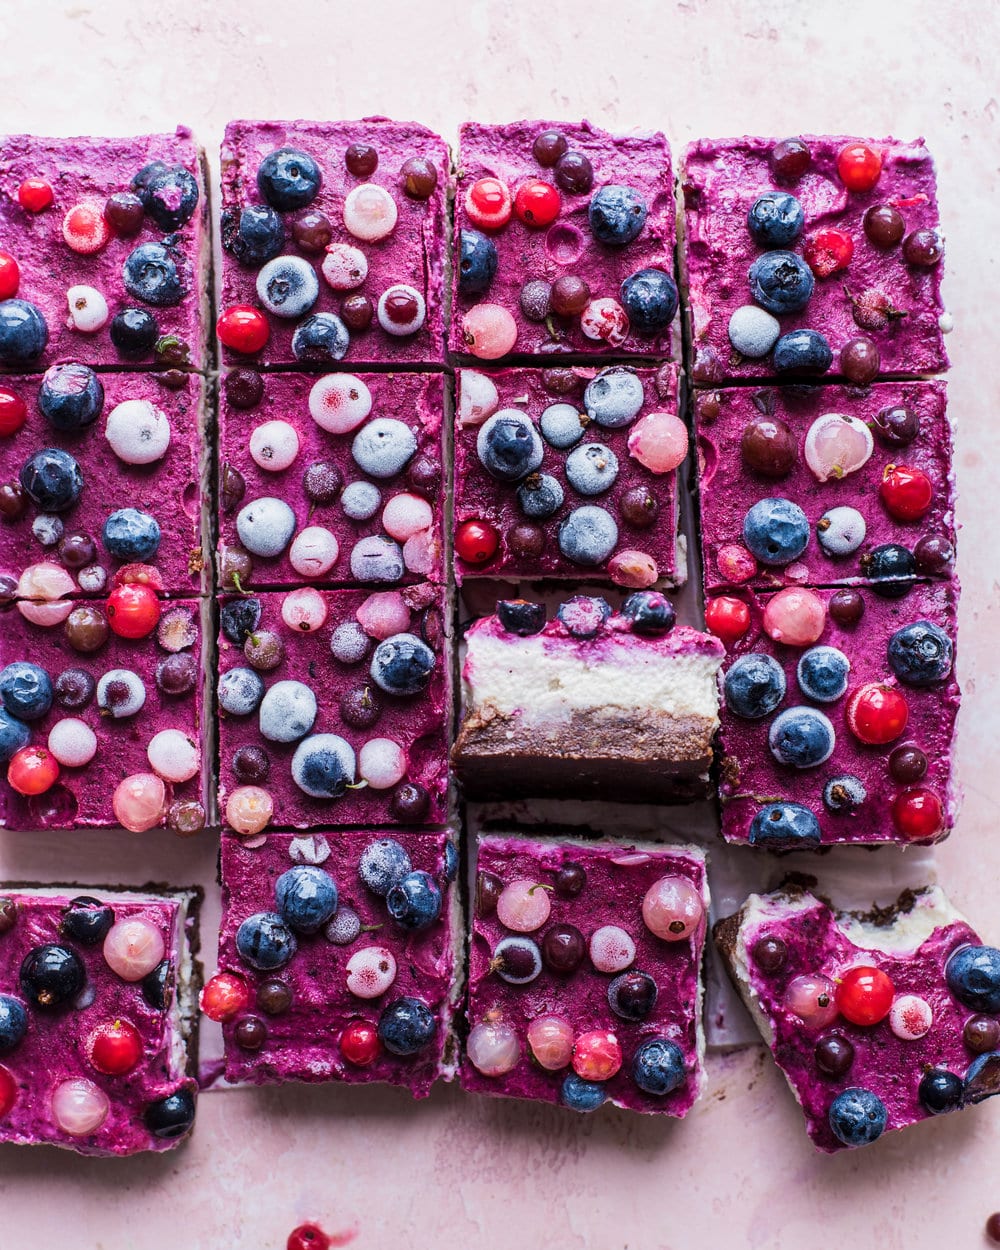 _YT what i eat in a day - berry cheesecake bars less closeup (1 of 1).jpg